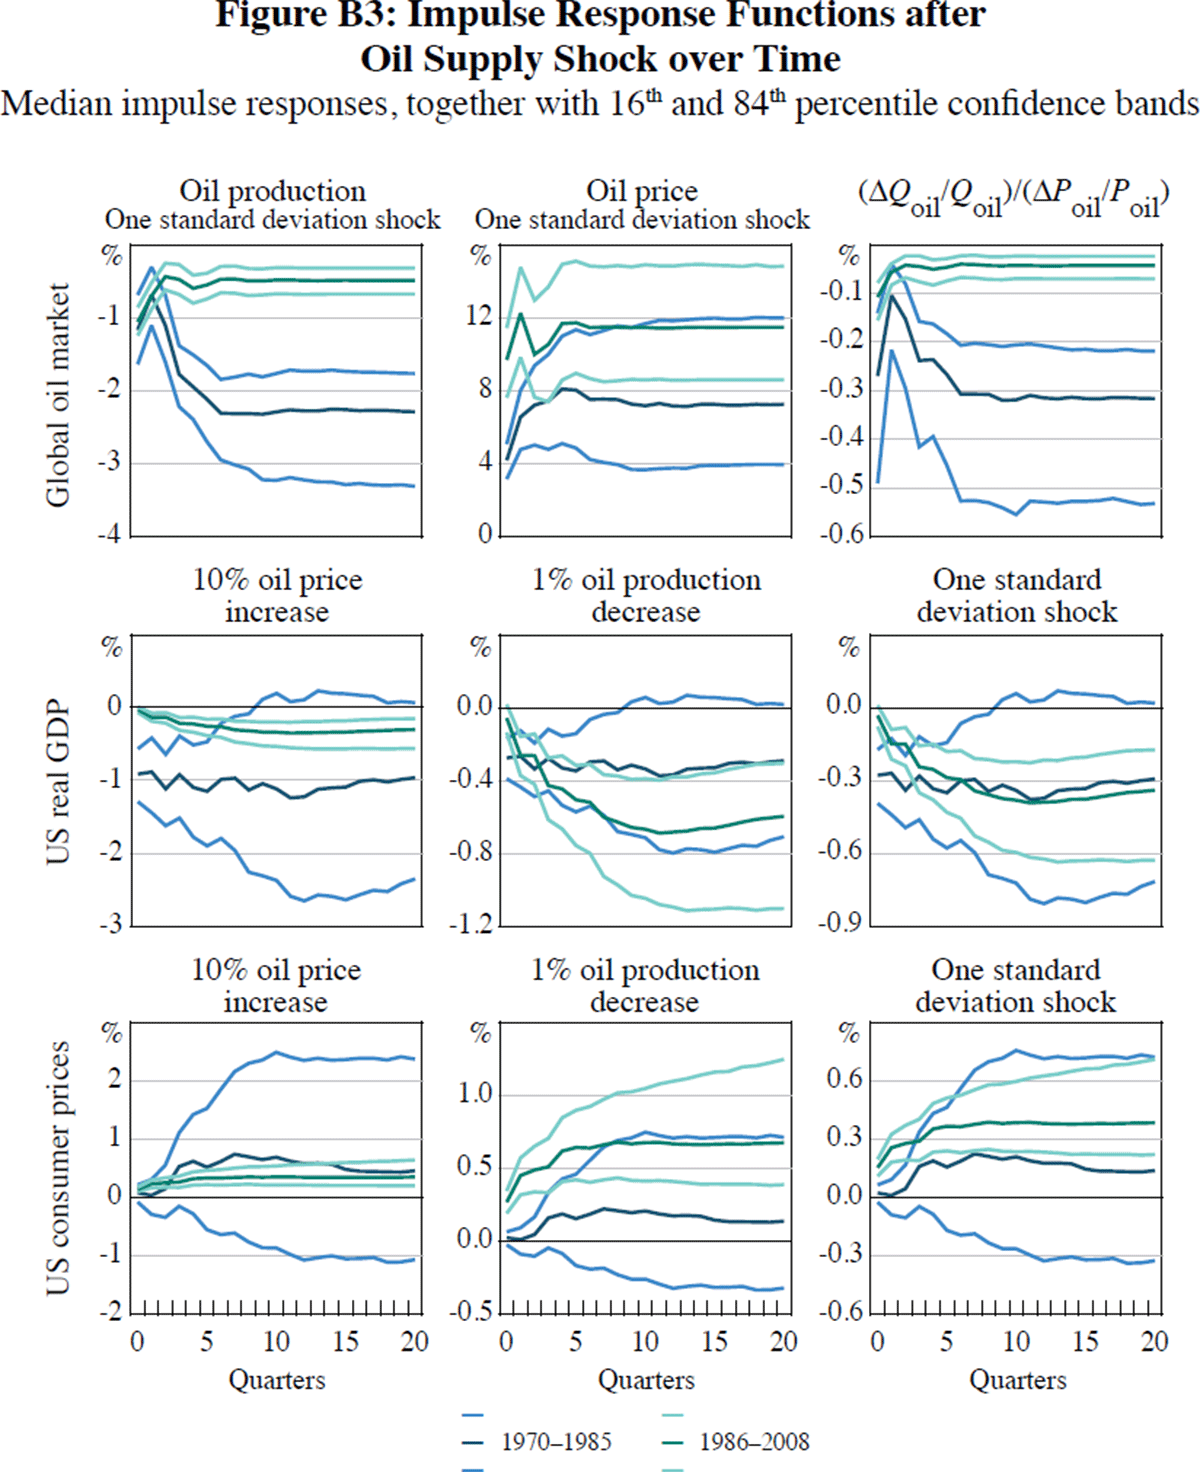 Figure B3: Impulse Response Functions after Oil Supply Shock over Time